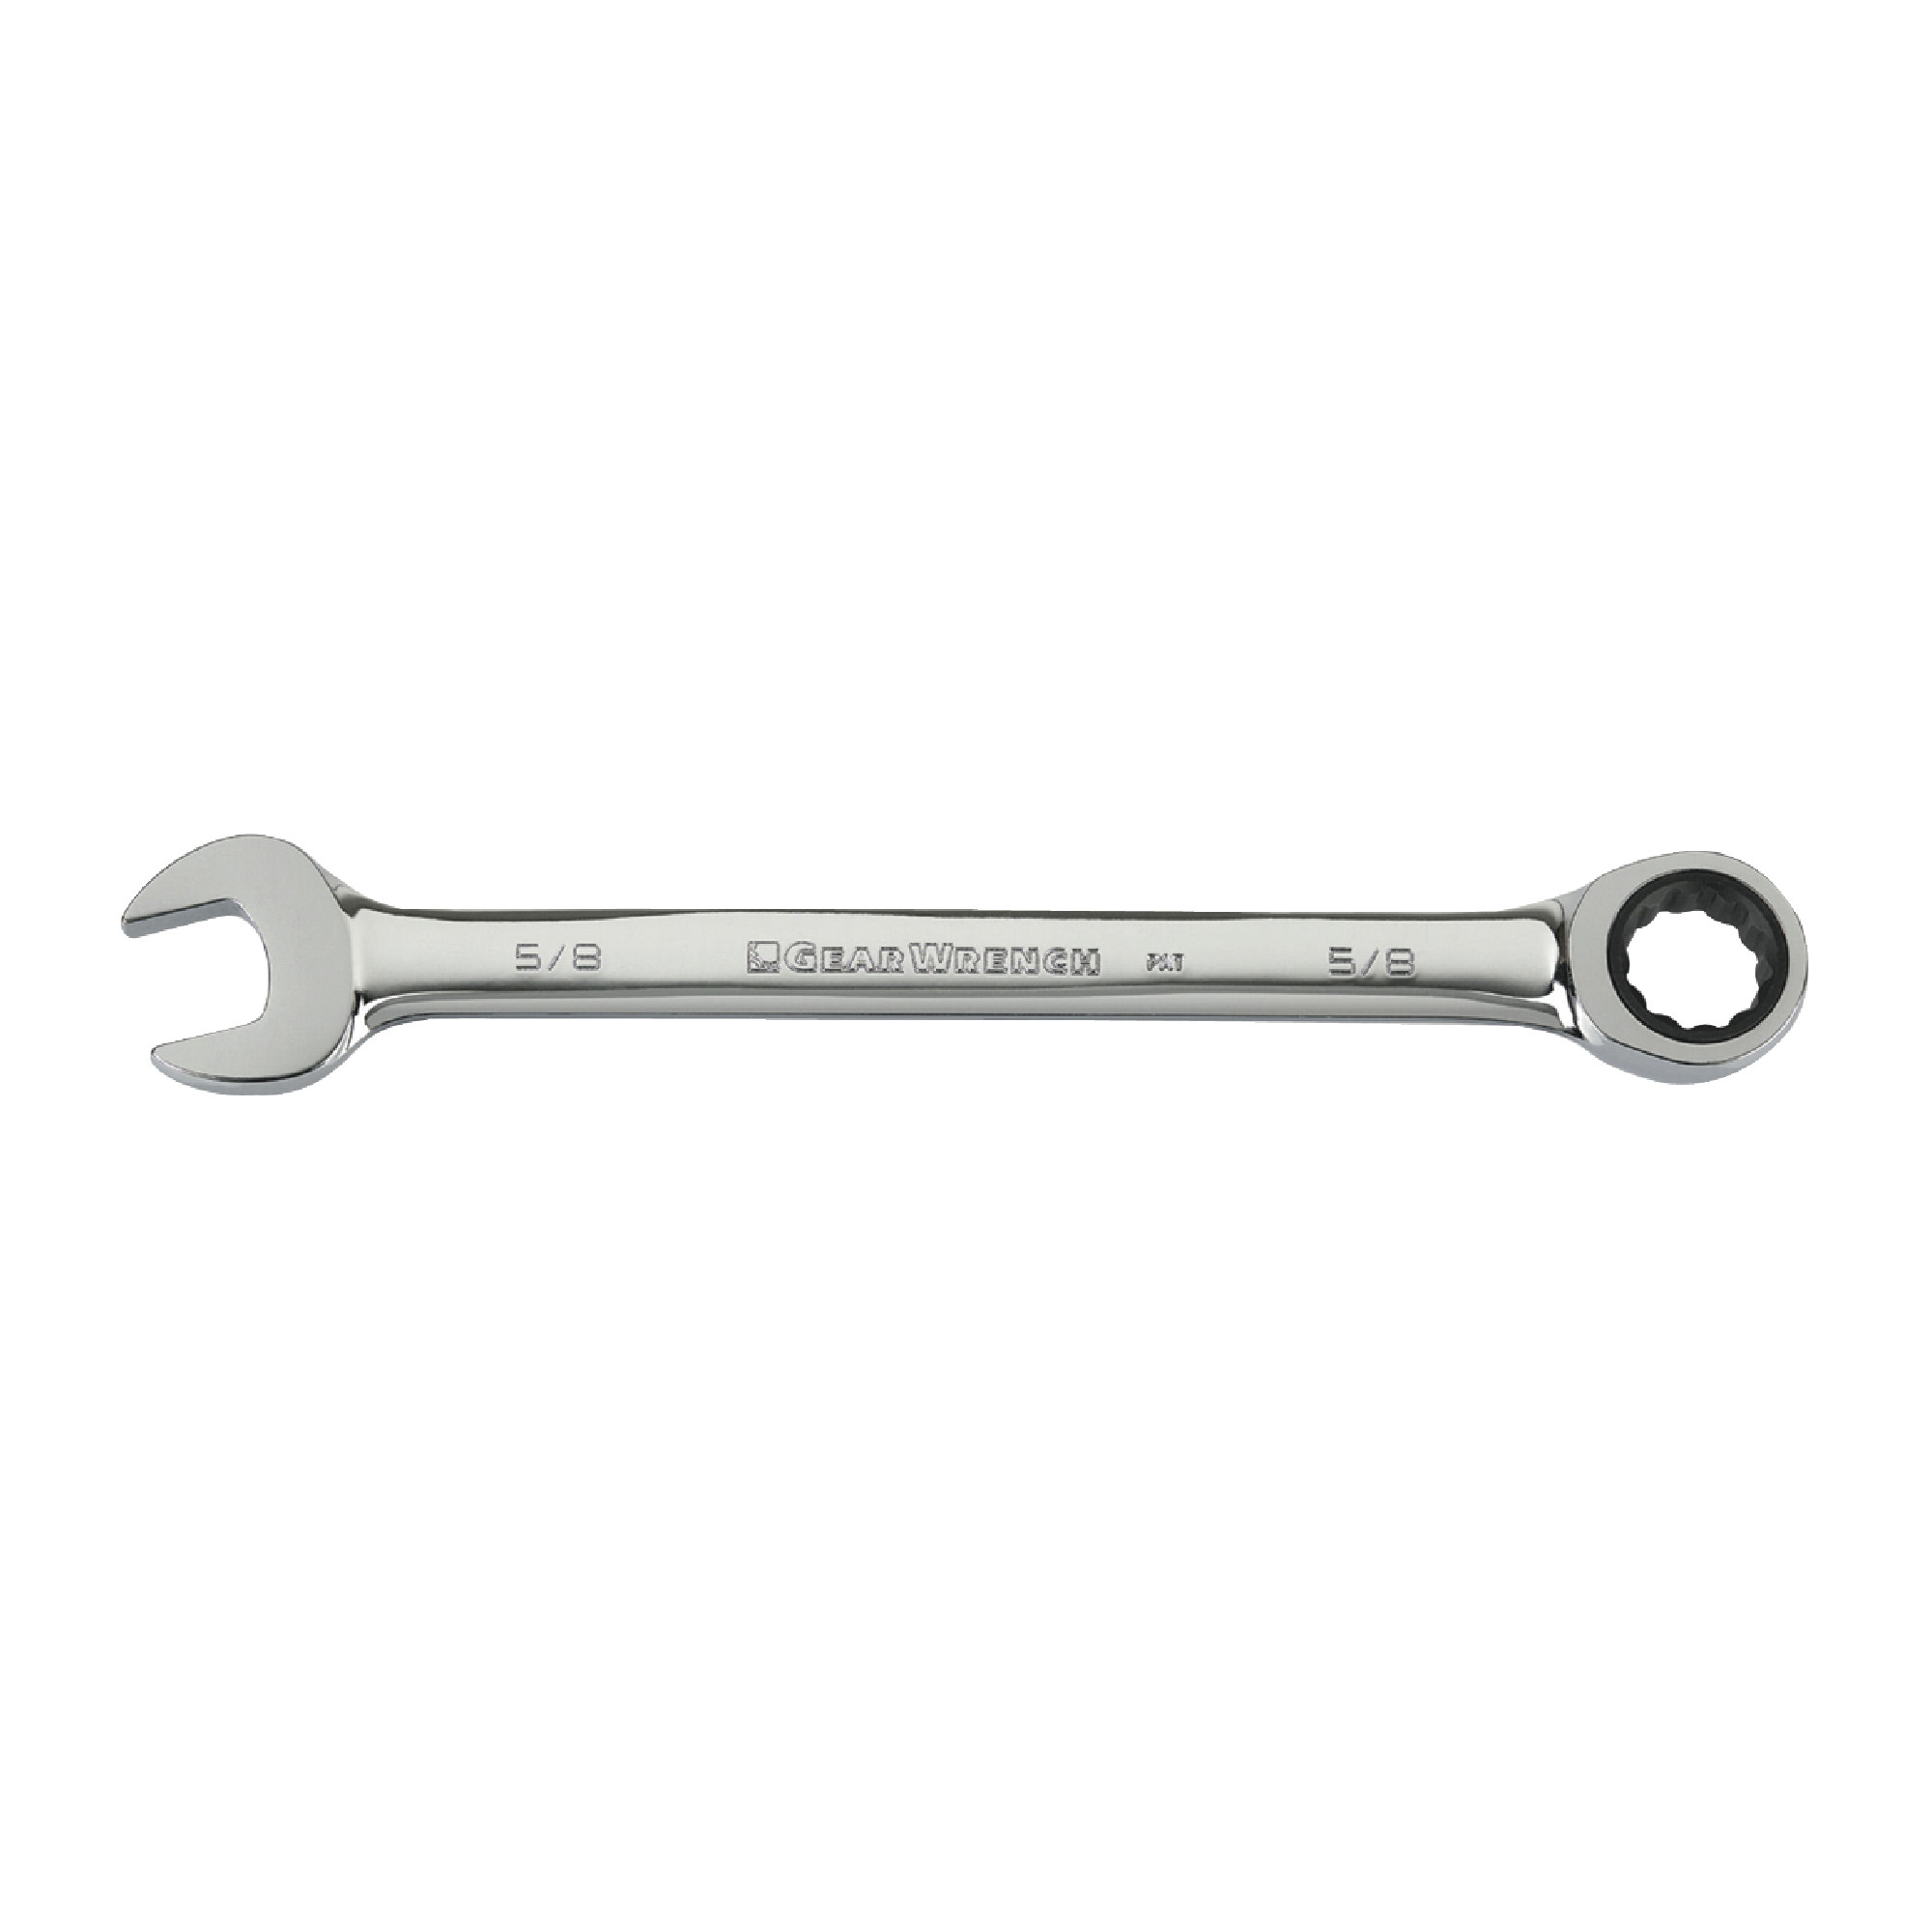 5/8" 12 Point Ratcheting Combination Wrench